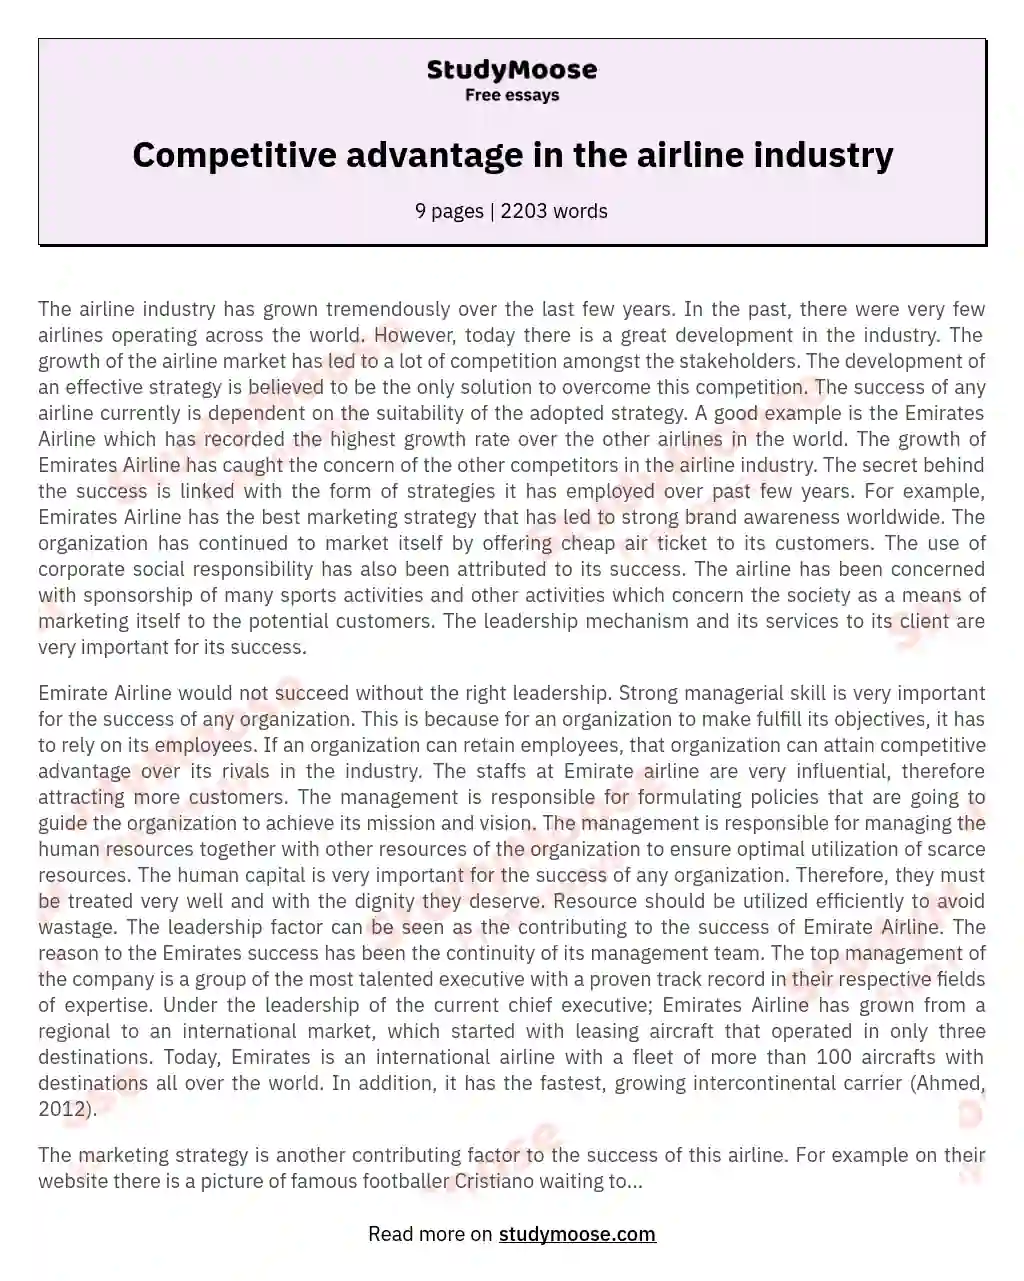 Competitive advantage in the airline industry